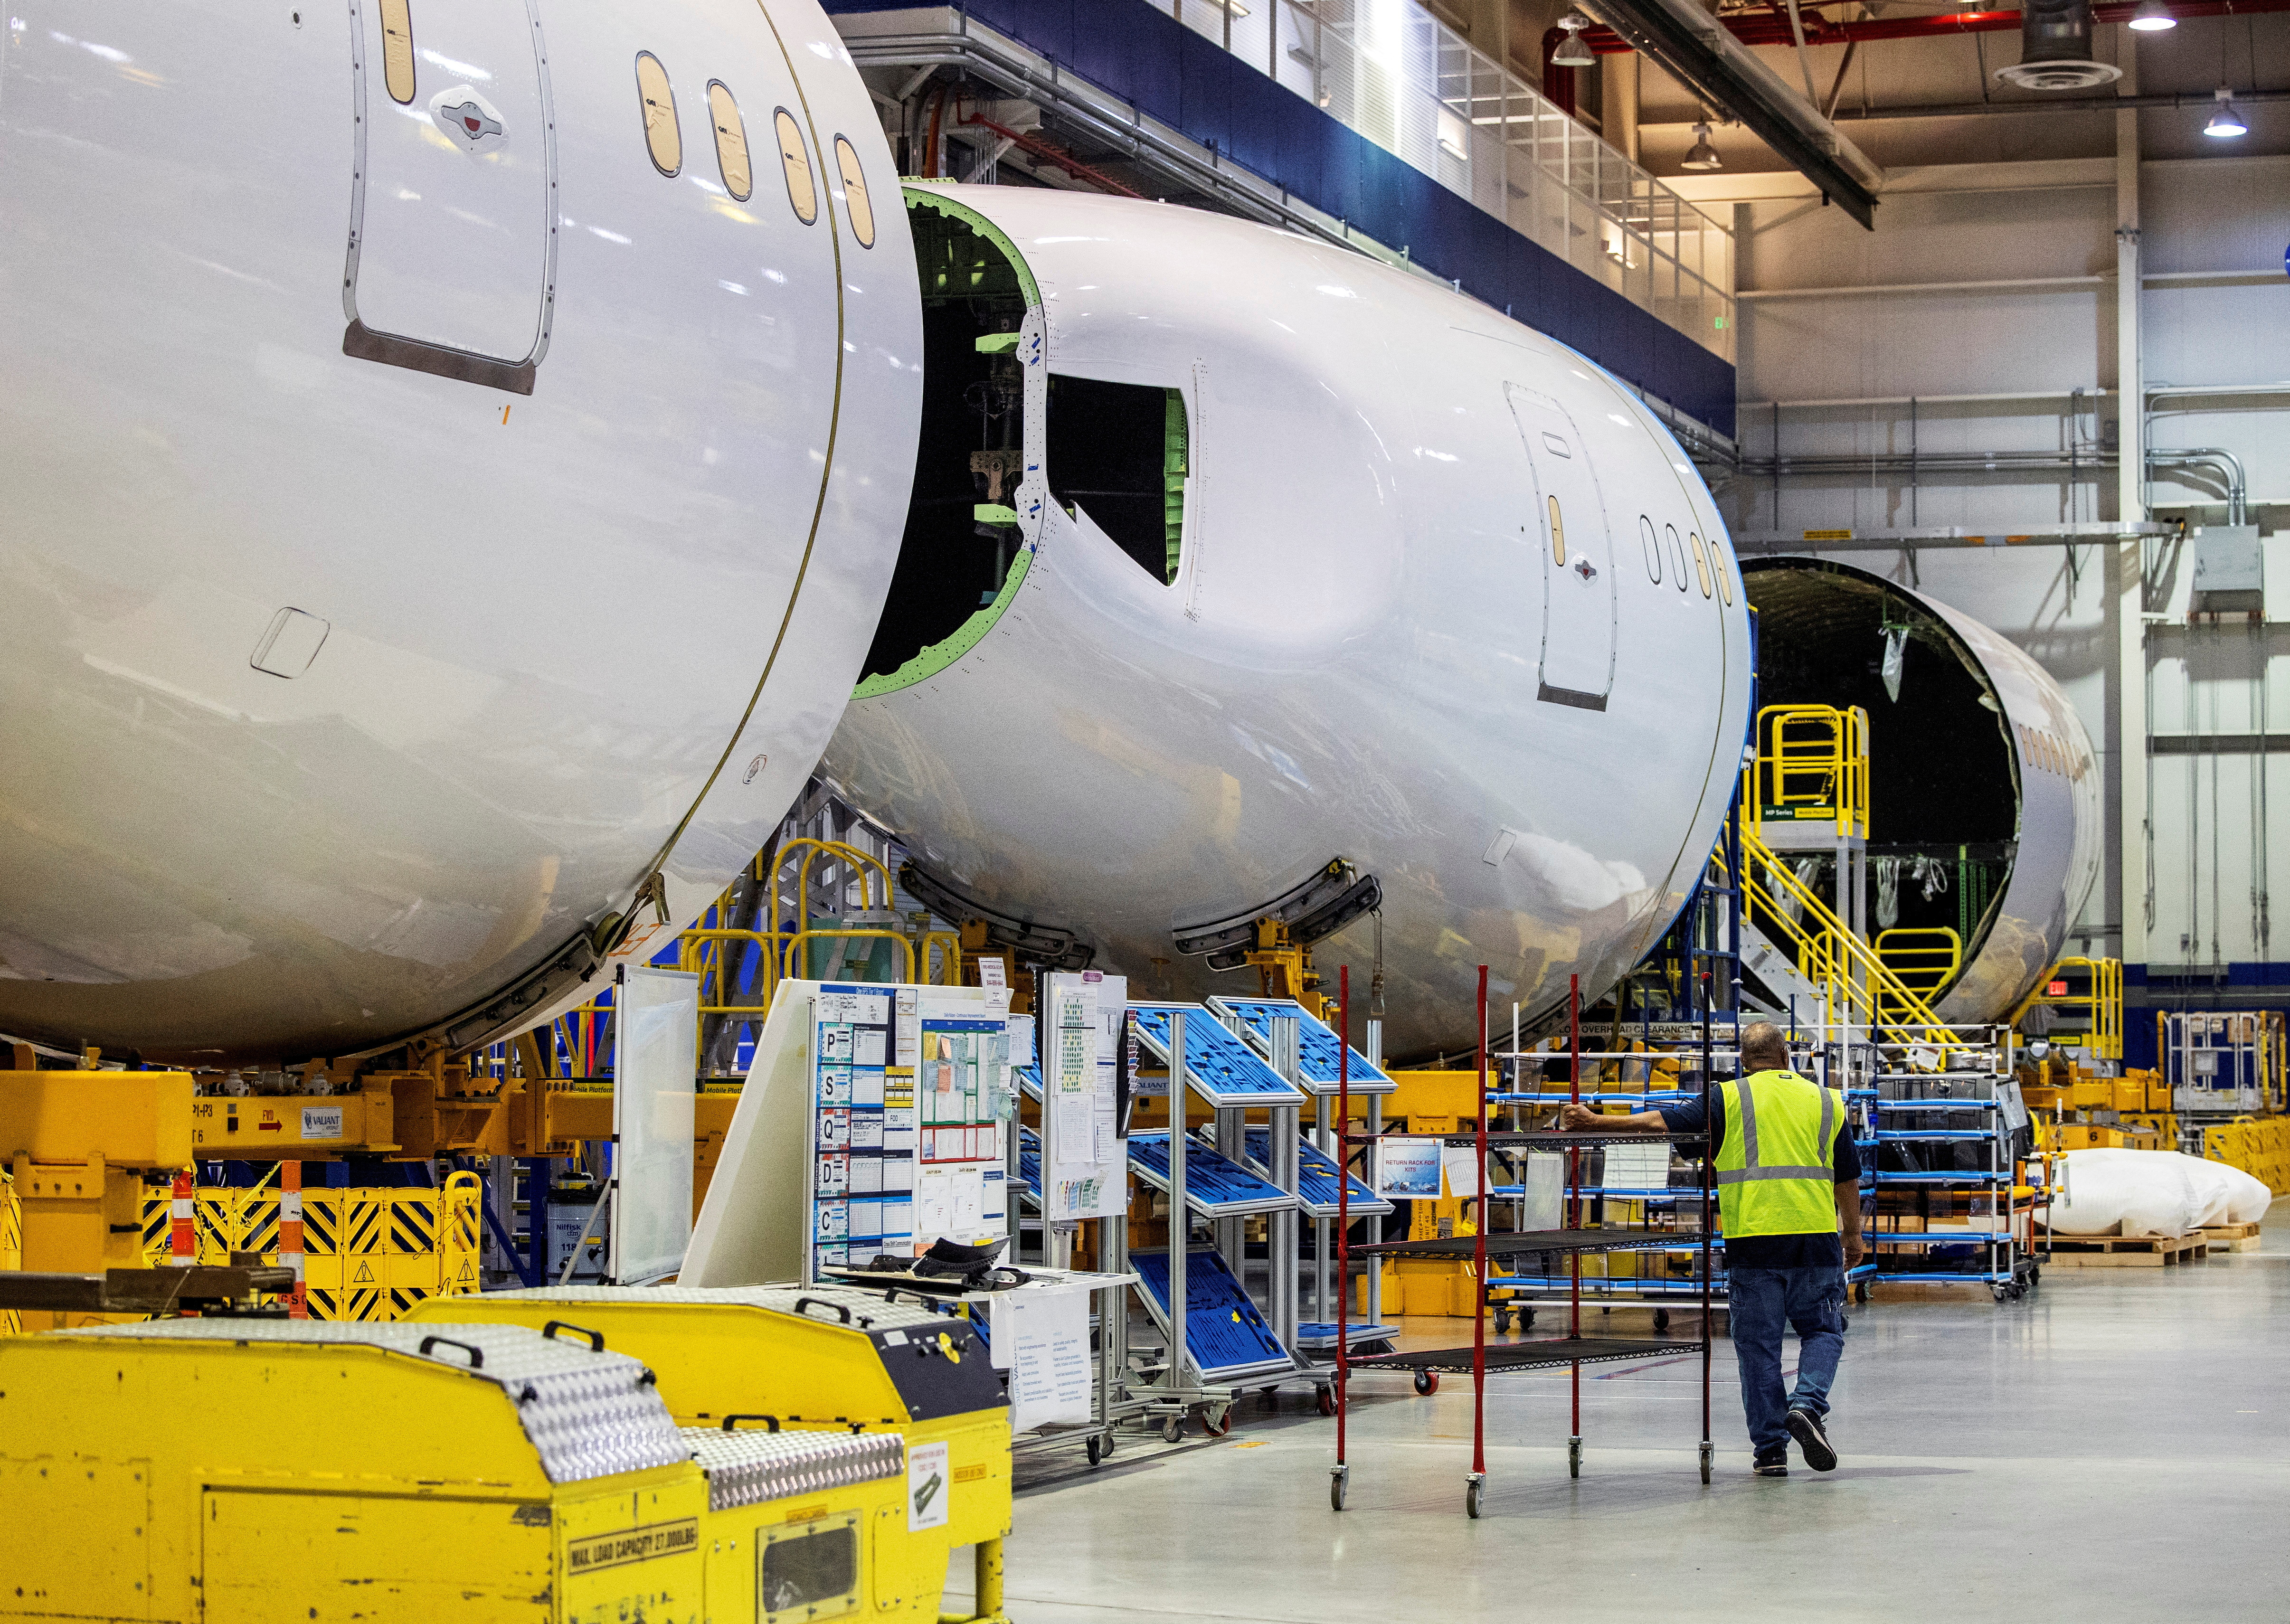 An employee walks past a fuselage section under construction at Boeing Co.'s 787 Dreamliner campus in North Charleston, South Carolina